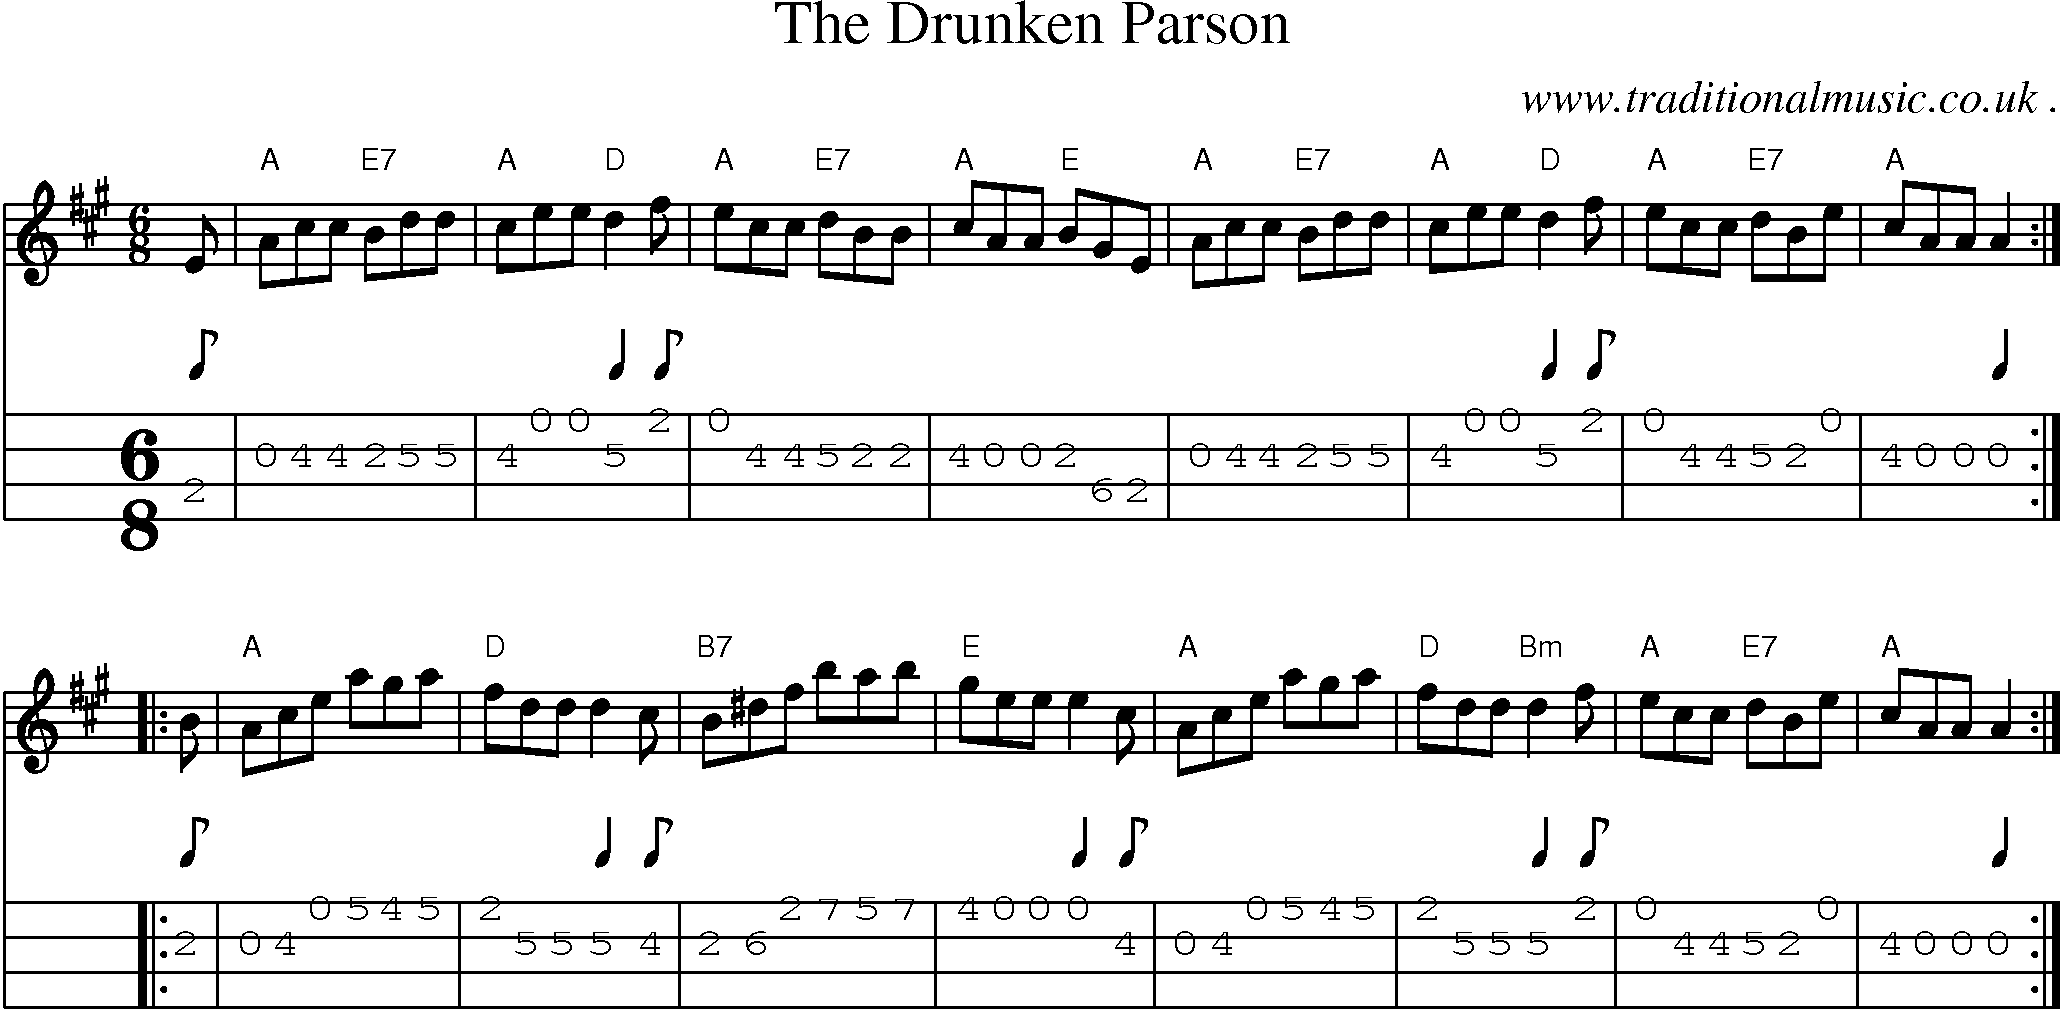 Sheet-music  score, Chords and Mandolin Tabs for The Drunken Parson